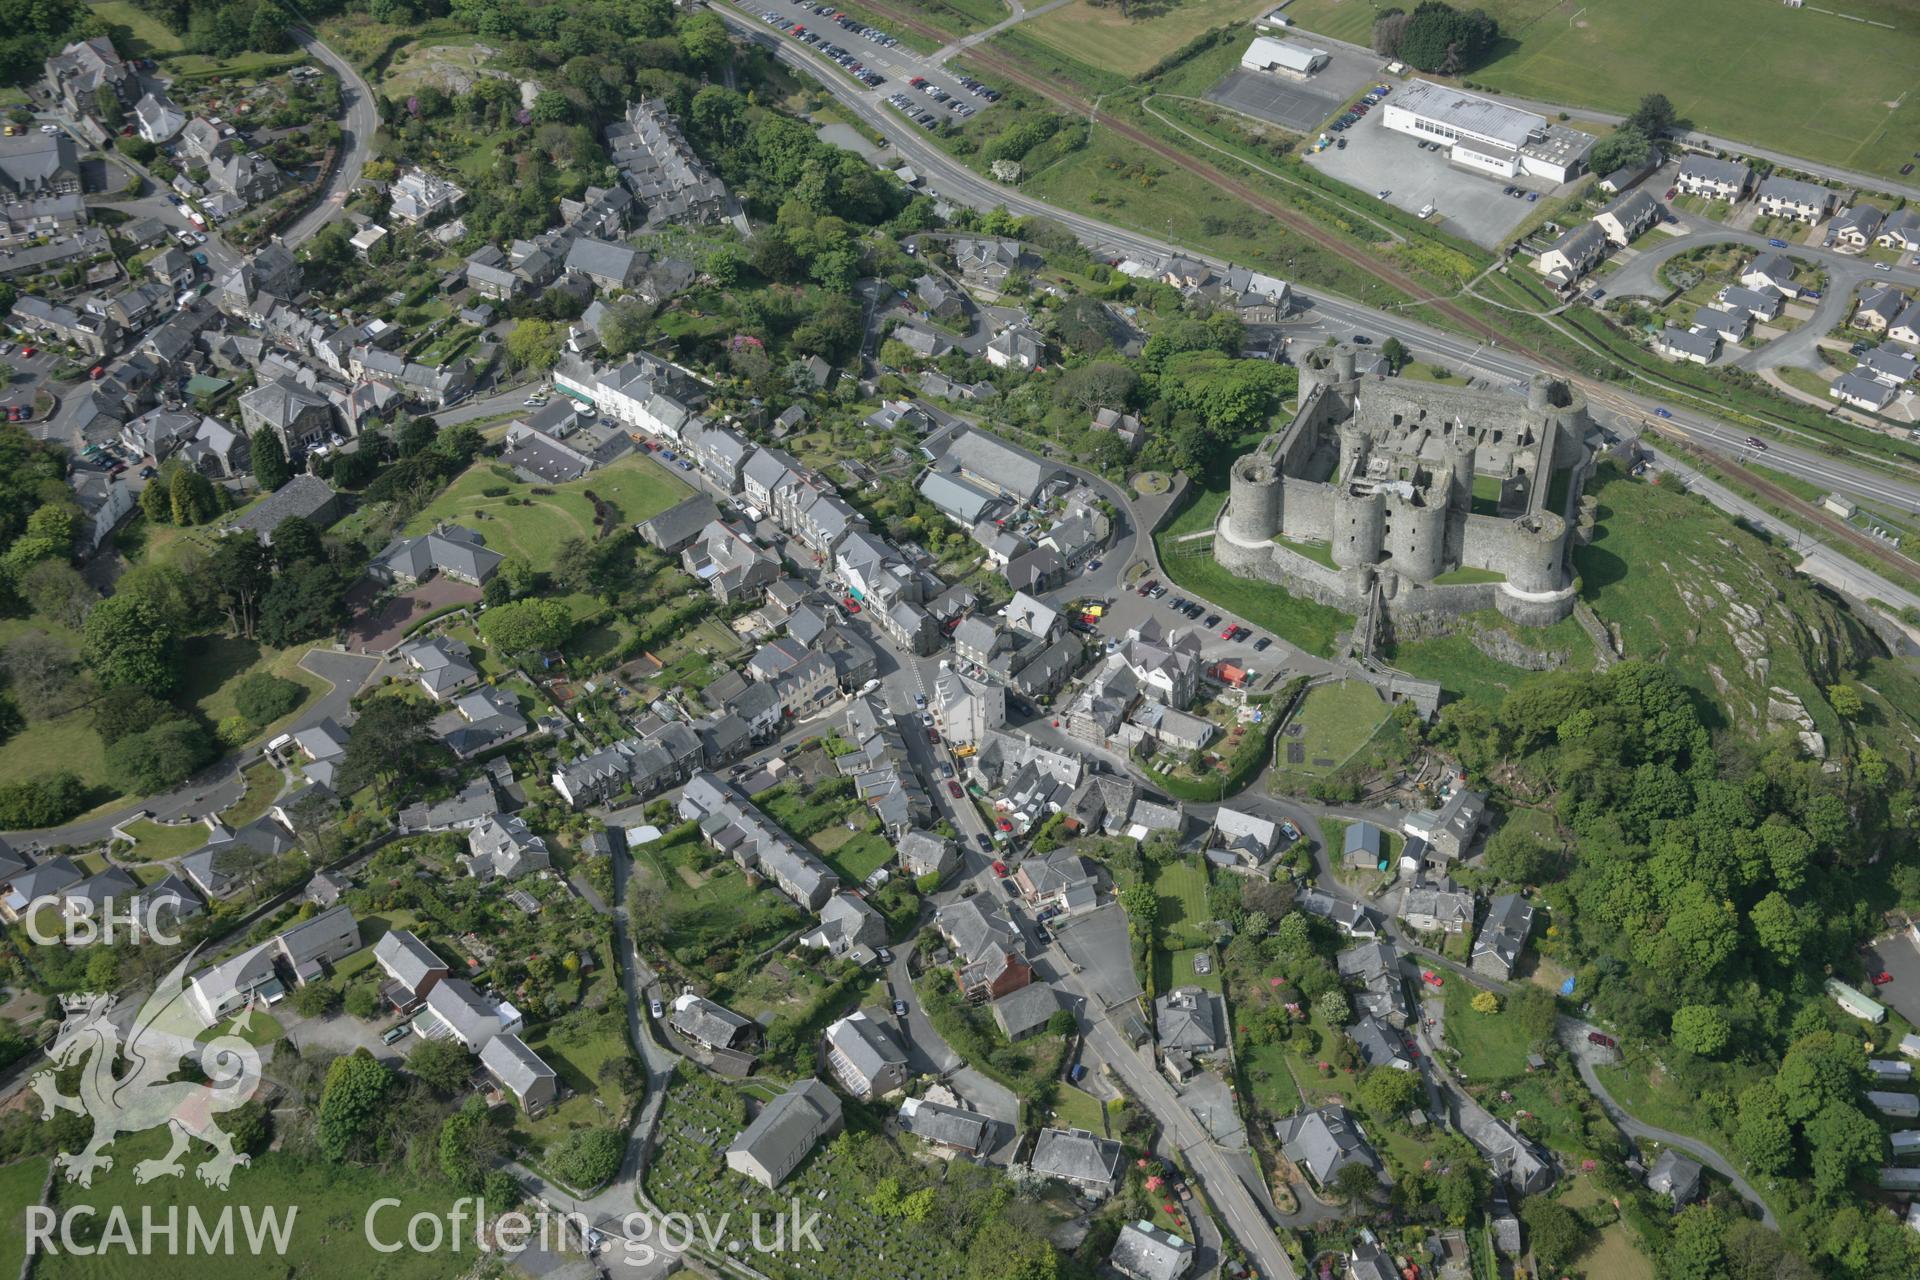 RCAHMW digital colour oblique photograph of Harlech. Taken on 17/05/2005 by T.G. Driver.